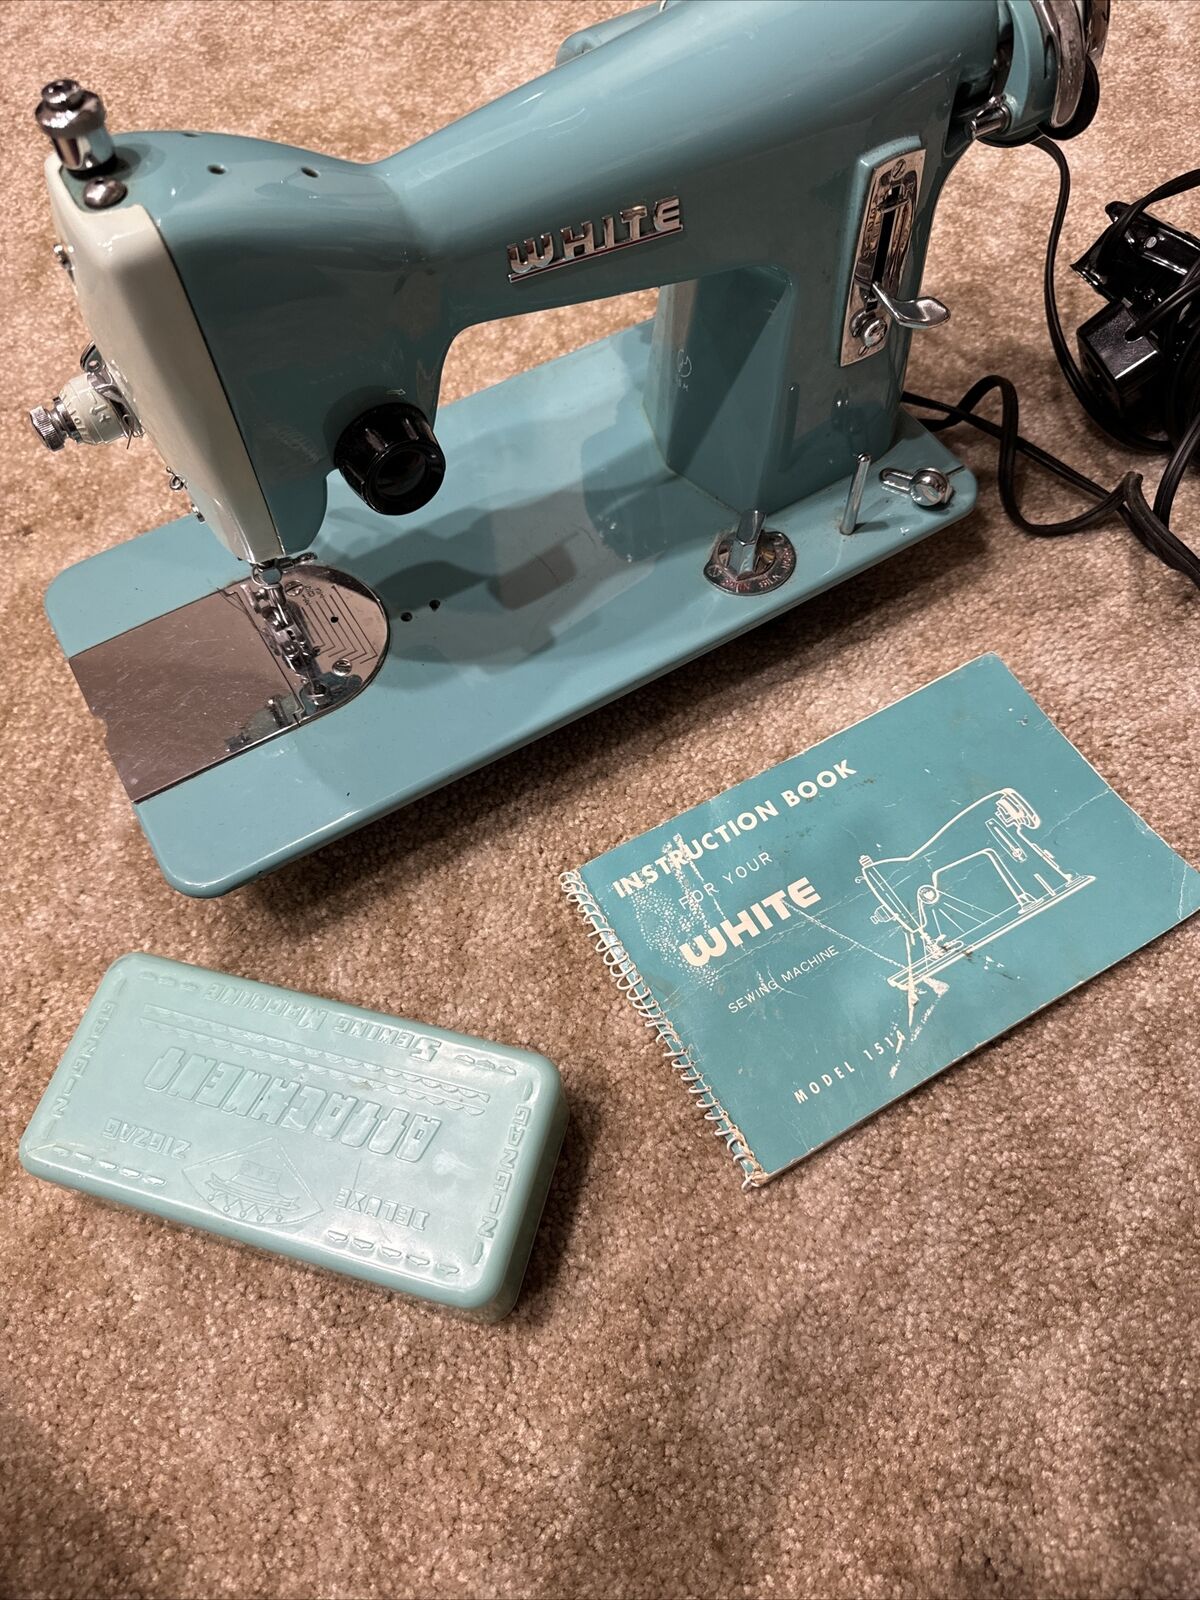 Vintage White 1514 Sewing Machine Turquoise Japanese Made 1950's Sewing Works